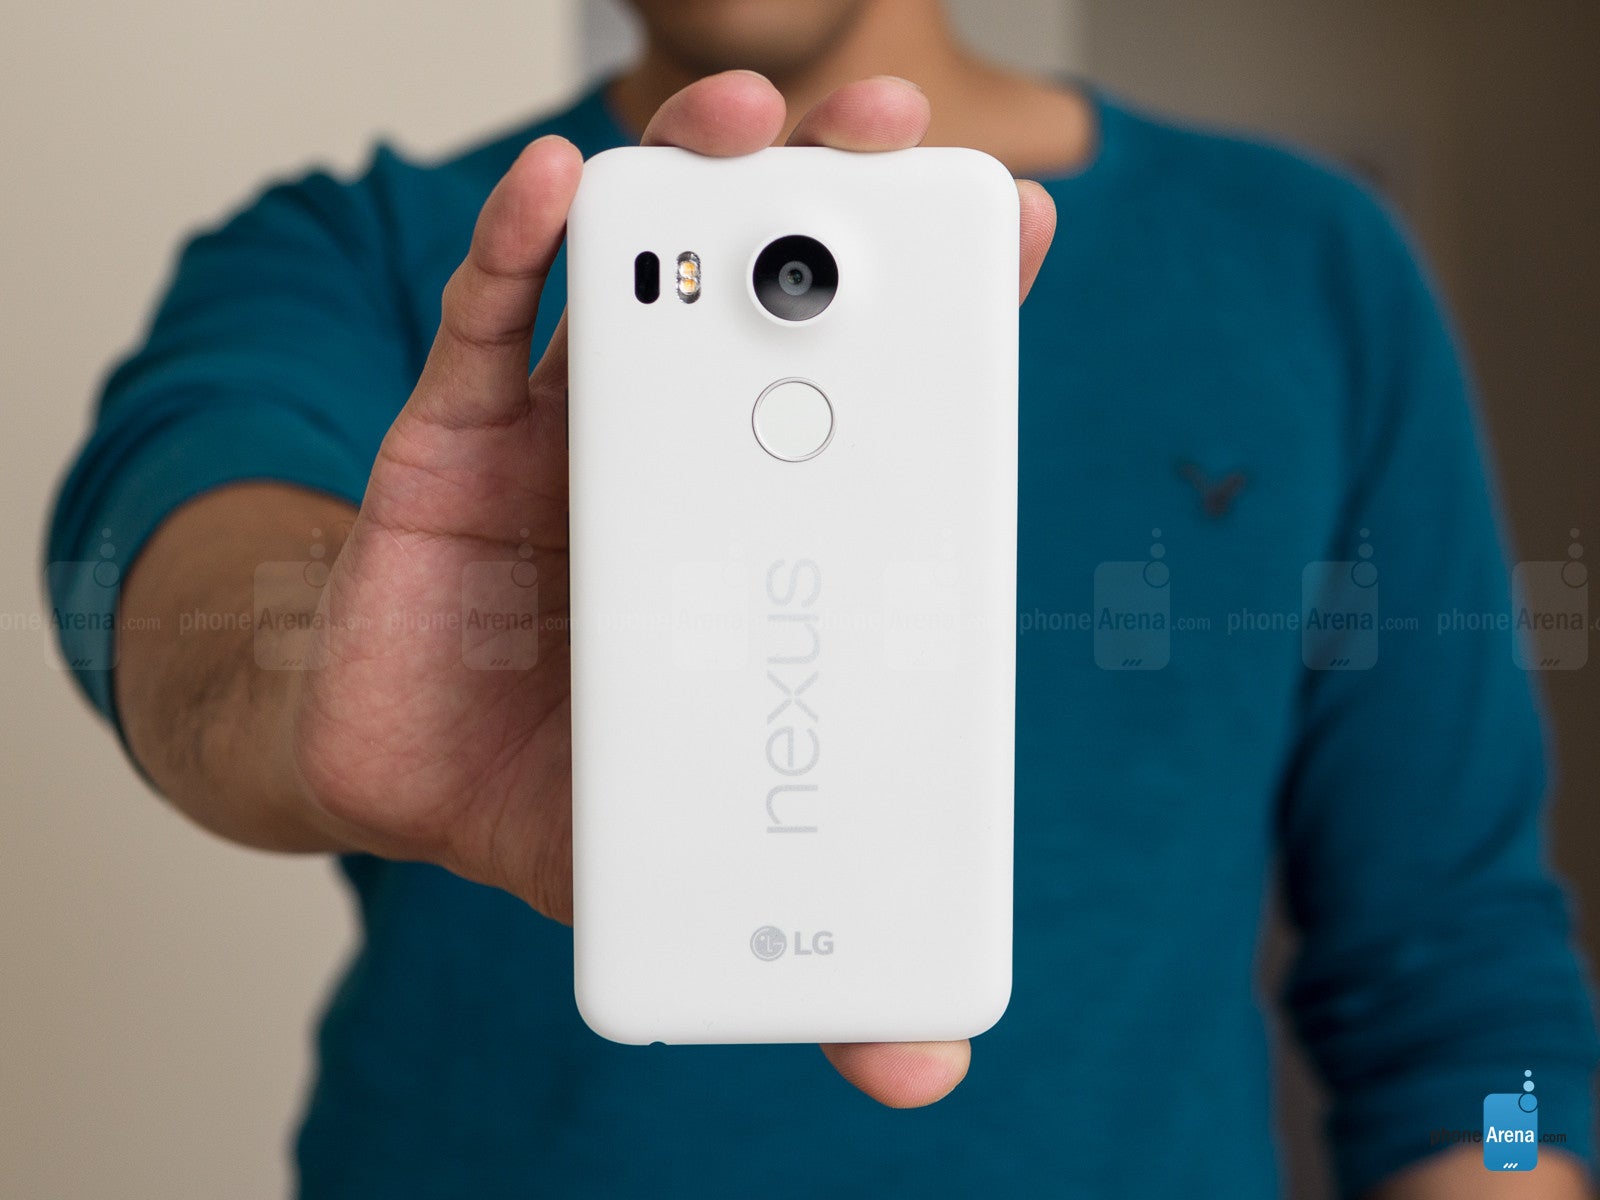 Quick, the Google Nexus 5X is discounted to $234.99 on Newegg, save 33%